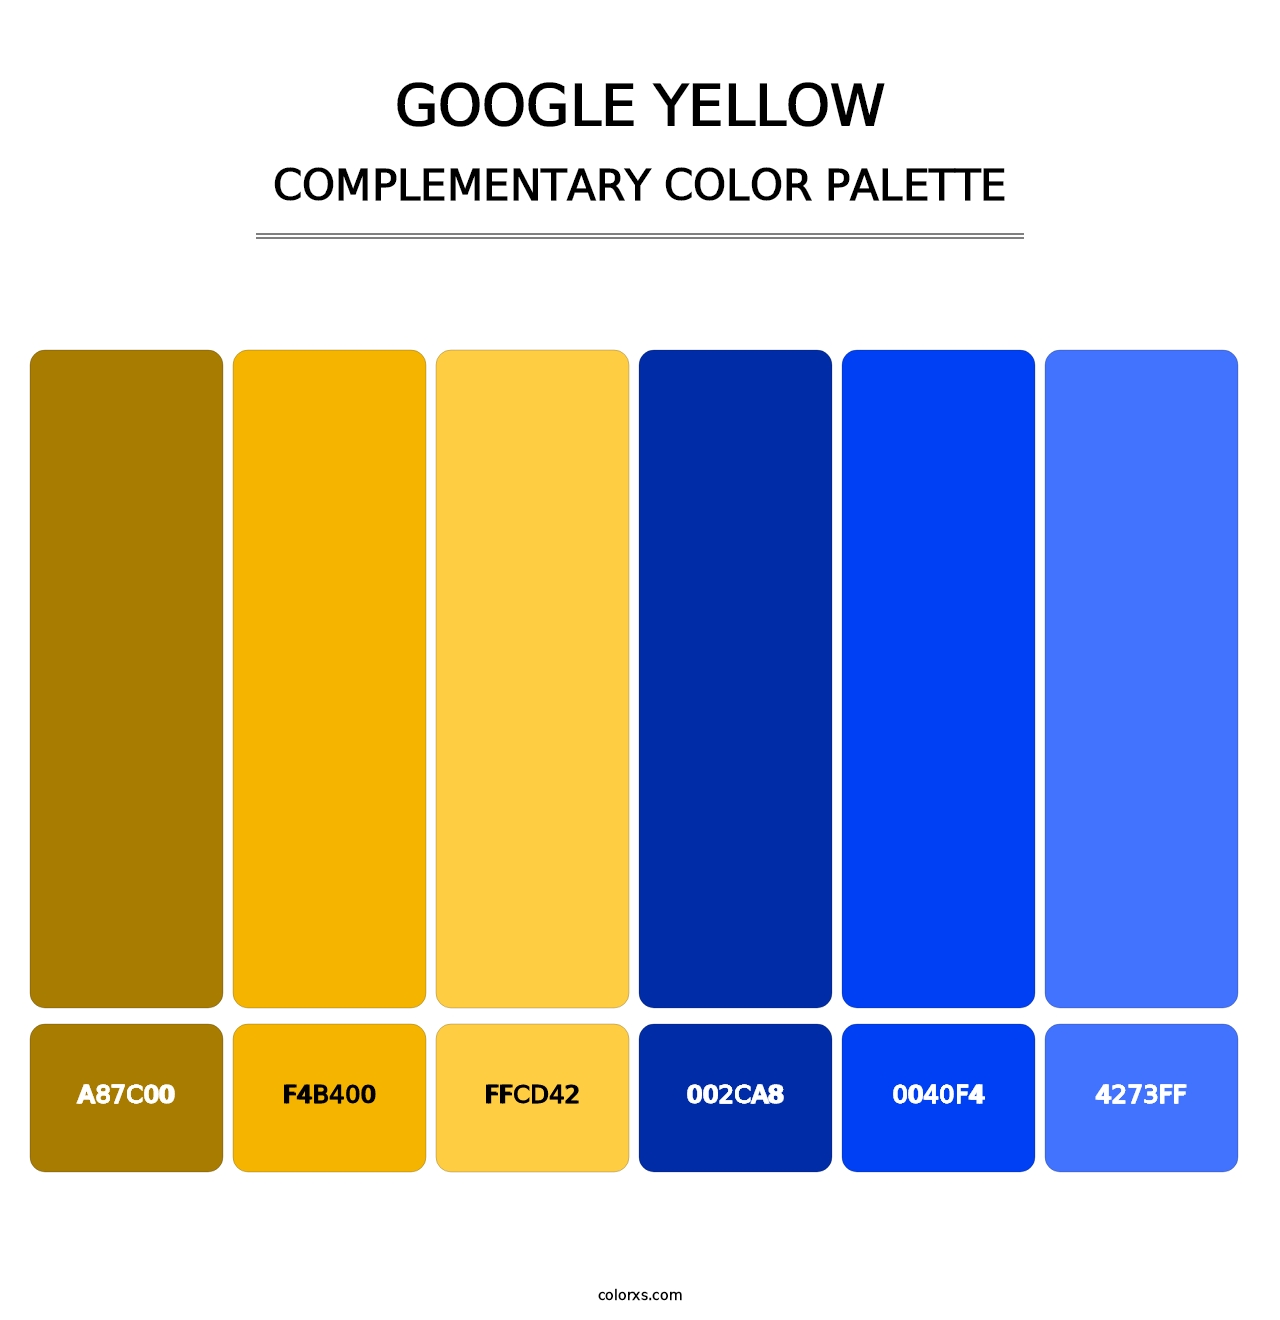 Google Yellow - Complementary Color Palette